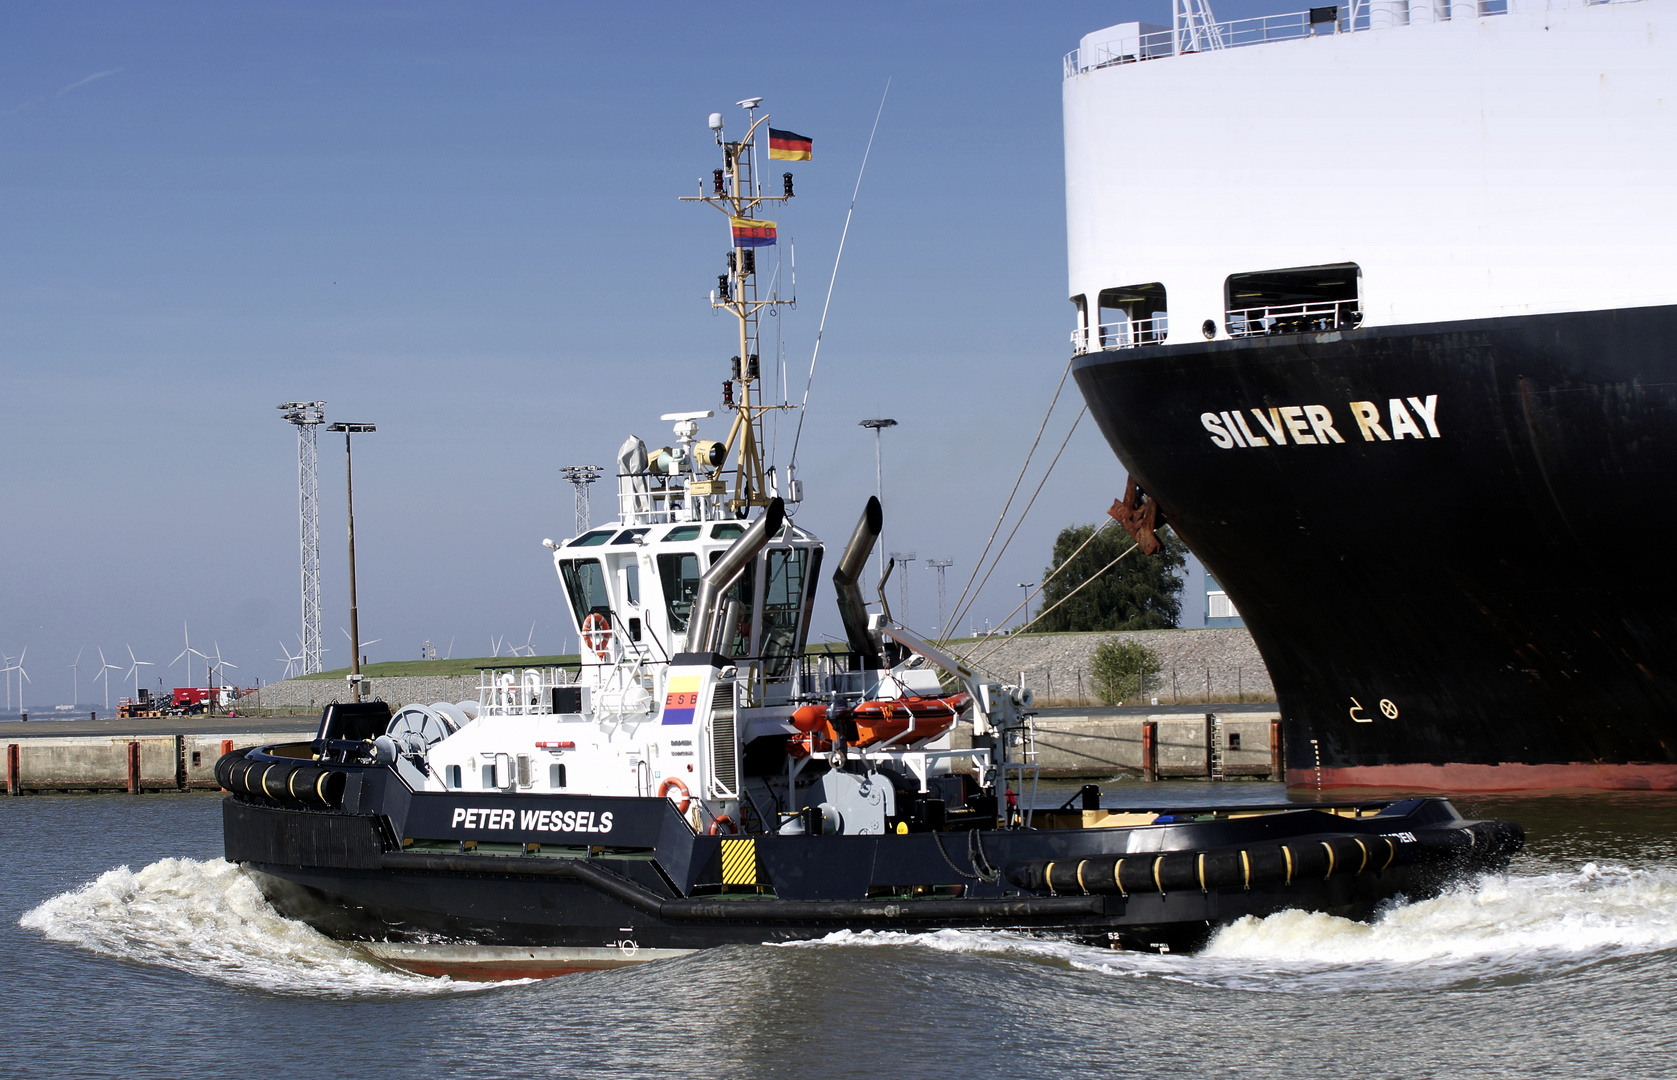 Tug Peter Wessels in front of Silver Ray in Emden _DSC6039